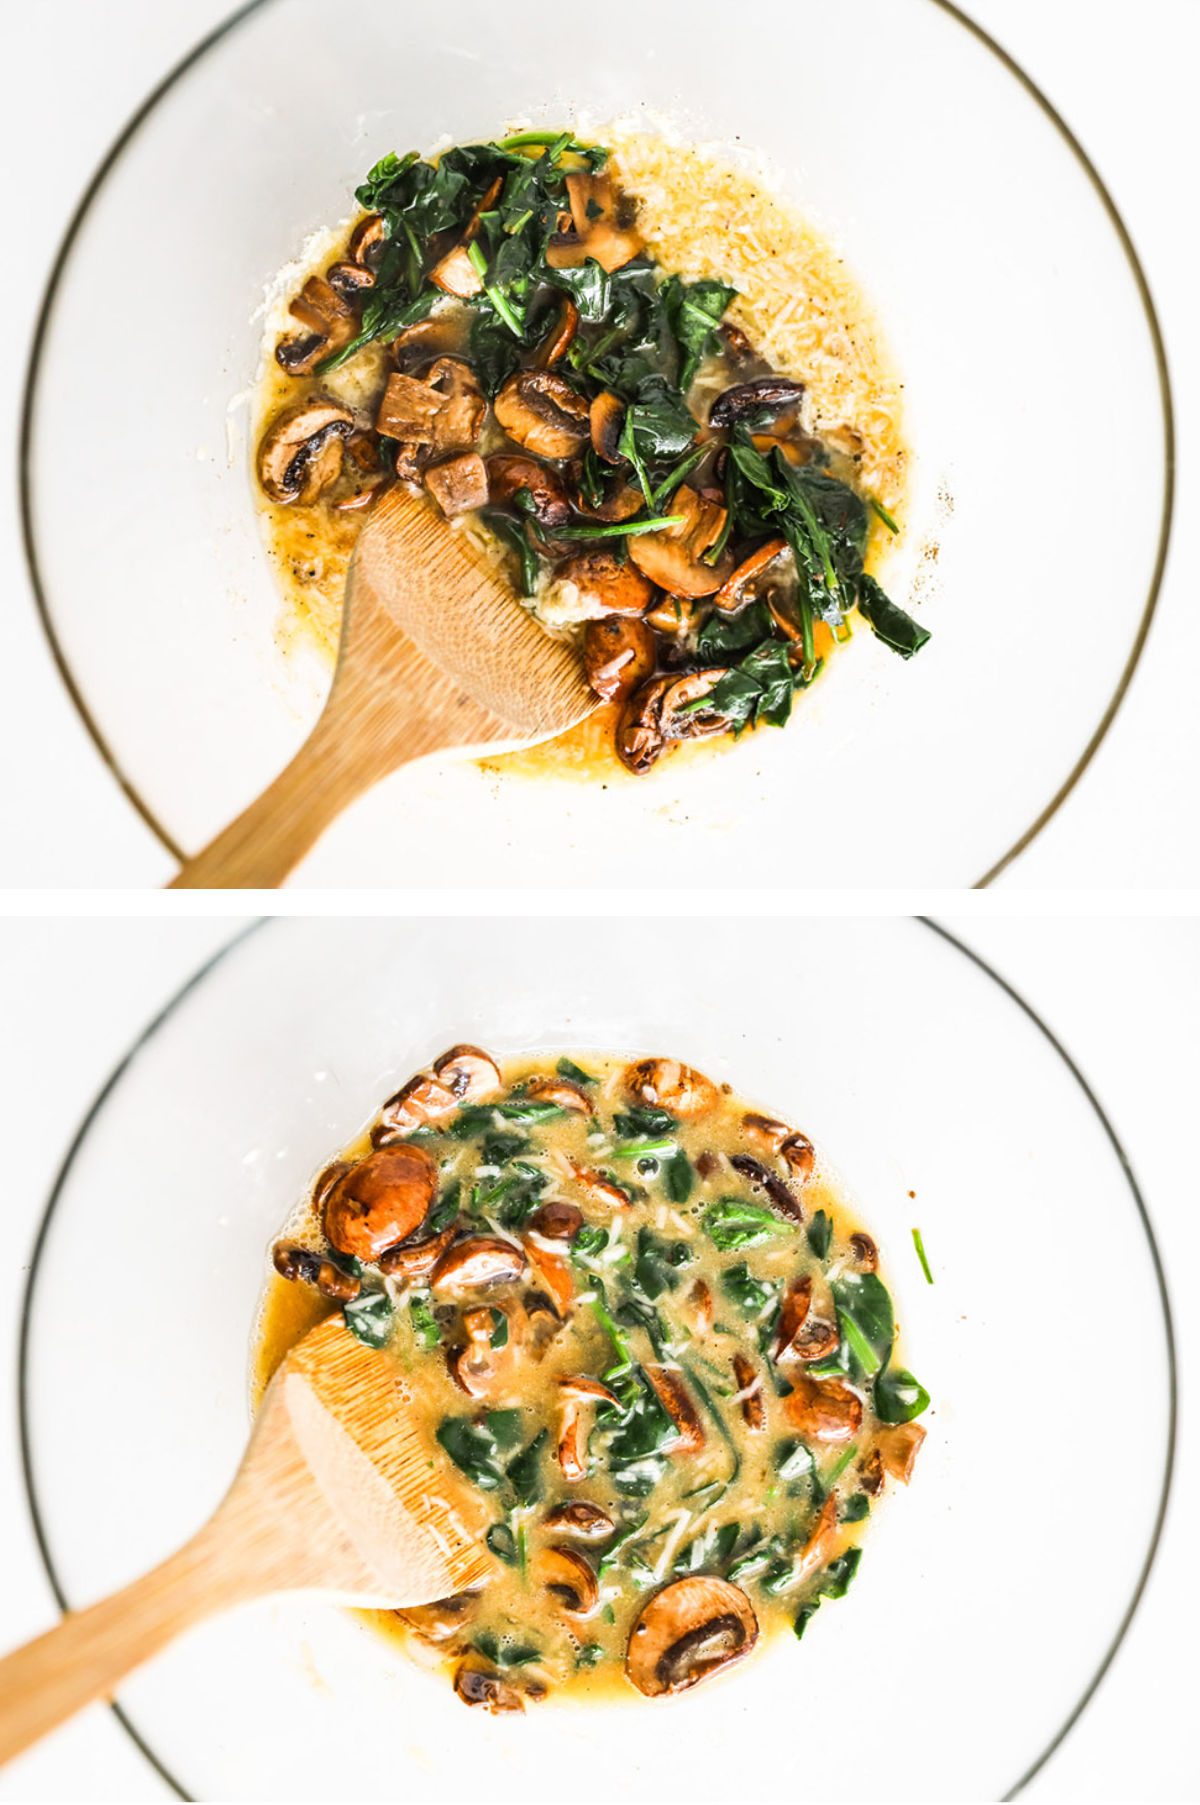 Two overhead images in one: 1. Sauteed mushrooms and spinach are added to egg mixture. 2. All ingredients are mixed. 